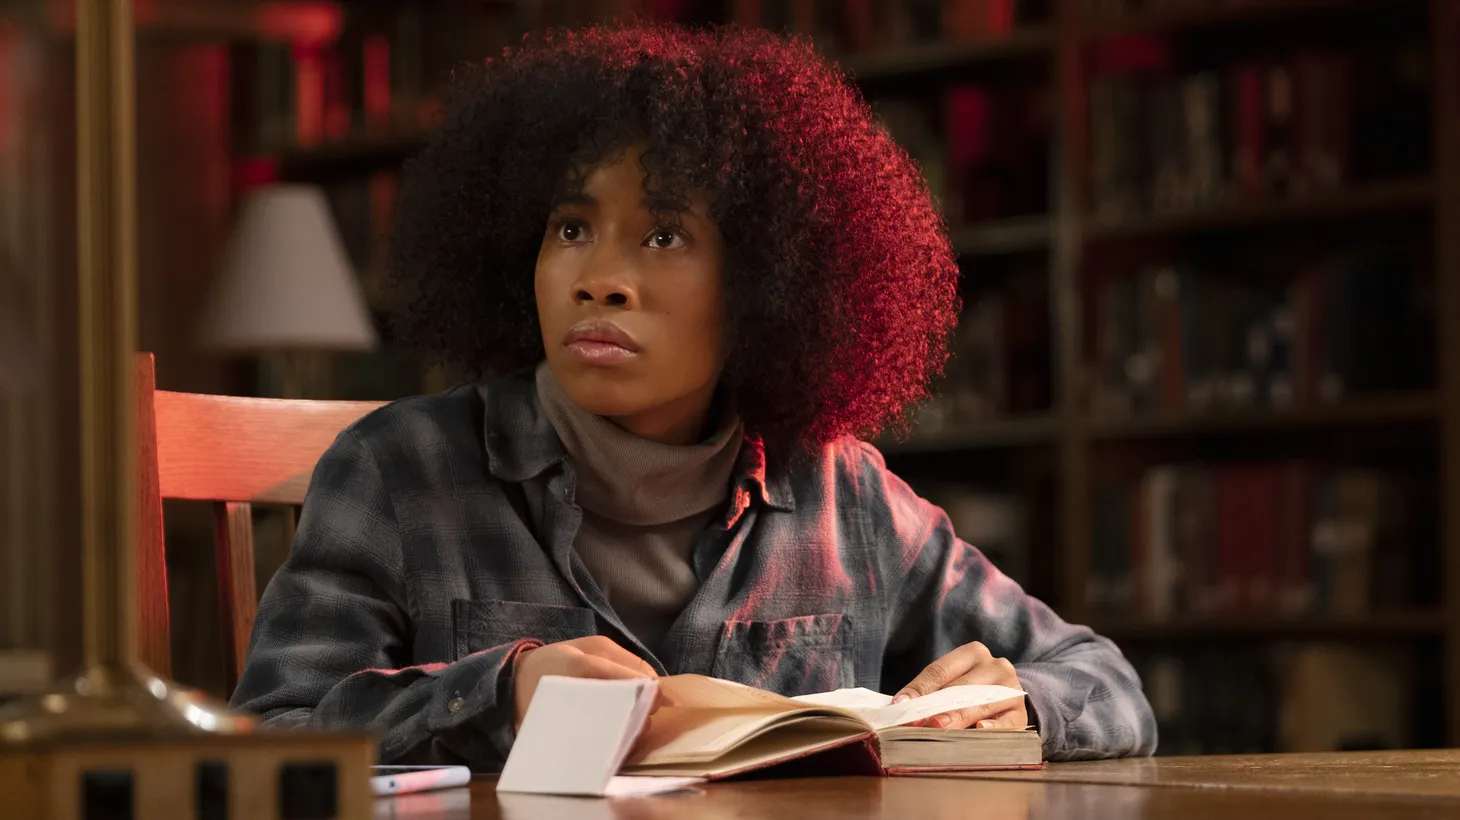 Zoe Renee portrays Jasmine Moore, a freshman at a predominantly white liberal arts college in new horror film “Master.”